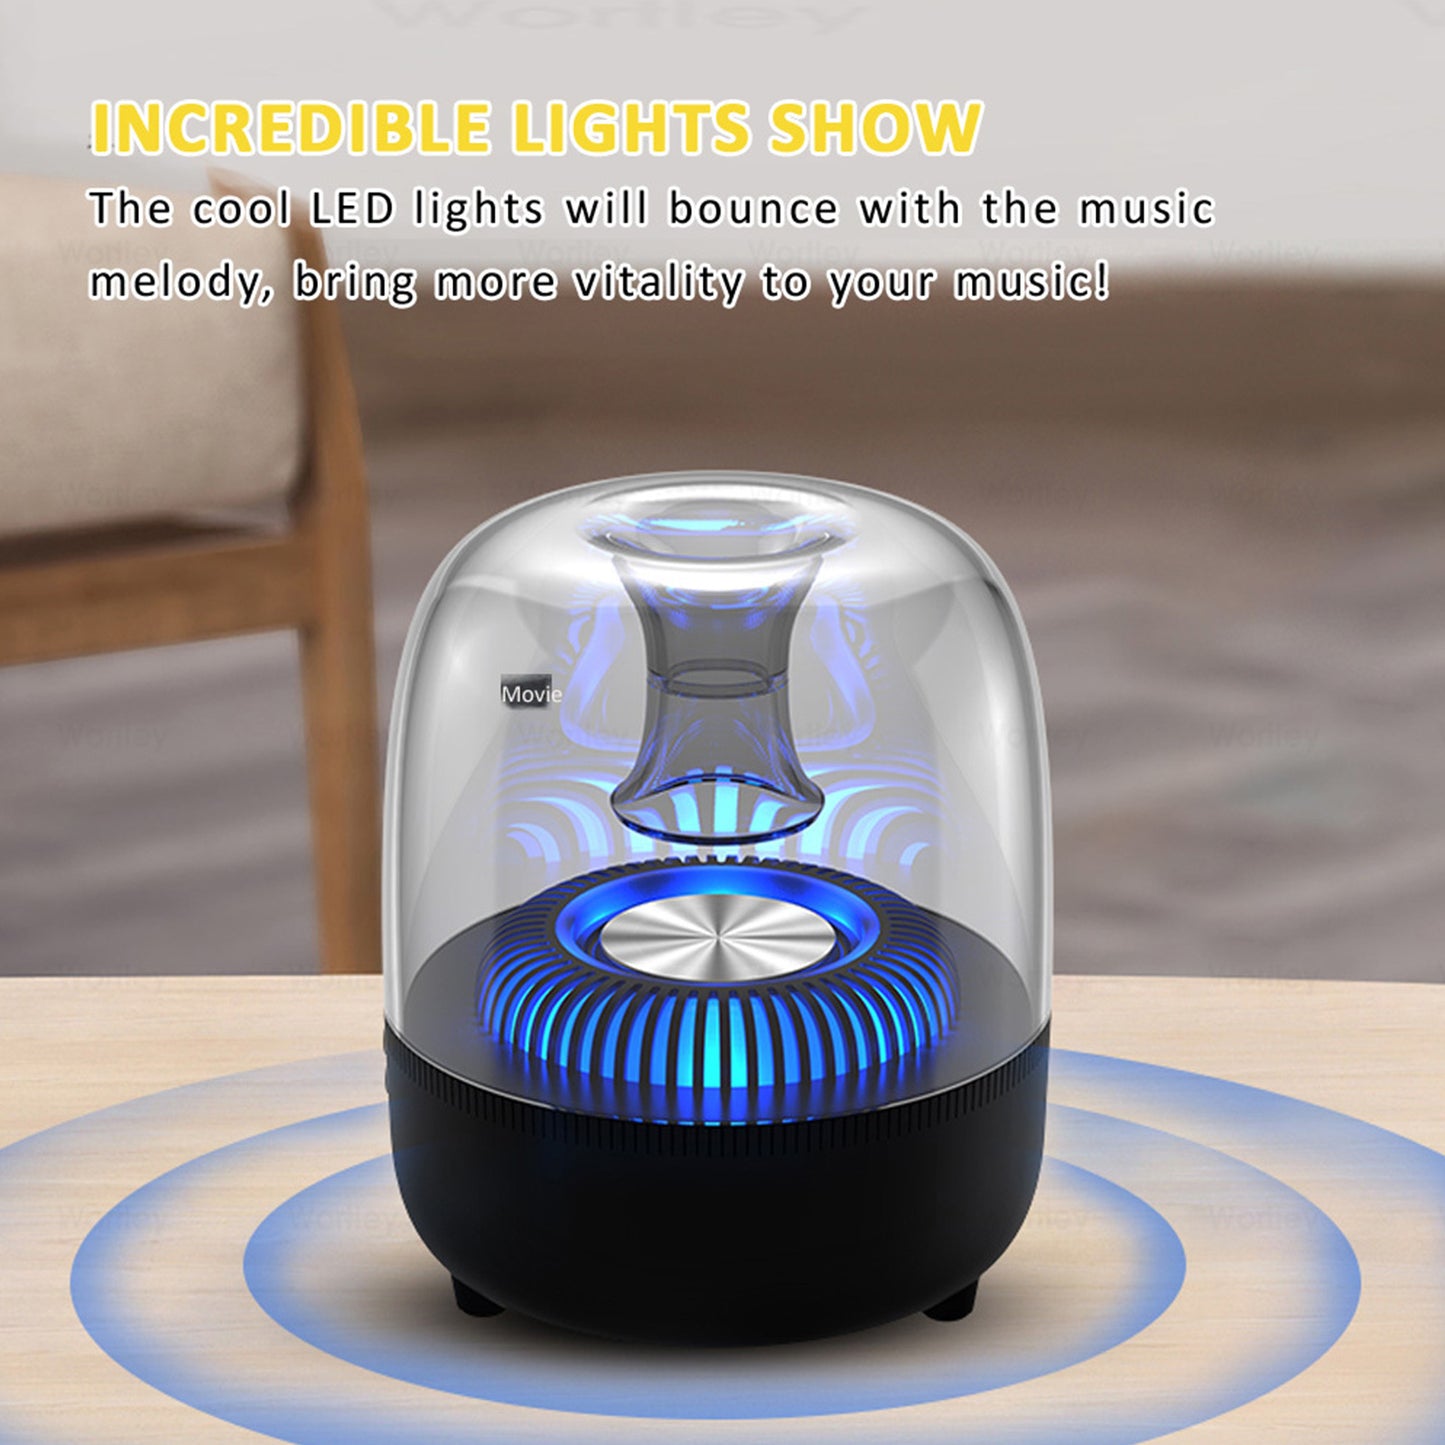 4X Wireless Rechargeable Bluetooth Speaker LED Portable Stereo FM USB/TF/AUX